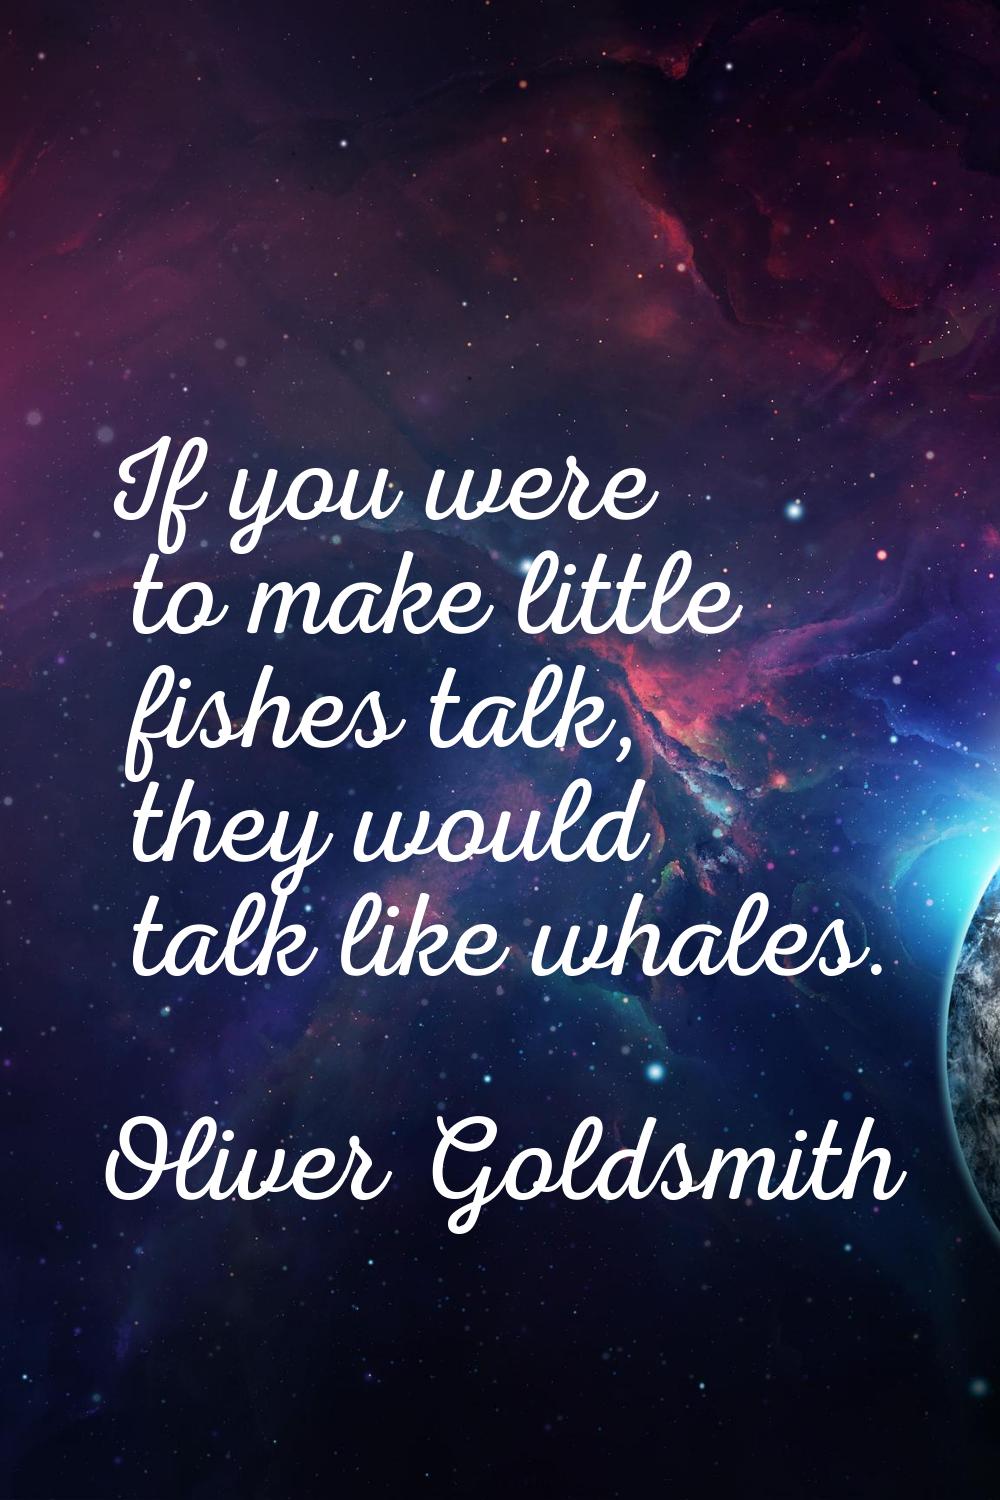 If you were to make little fishes talk, they would talk like whales.